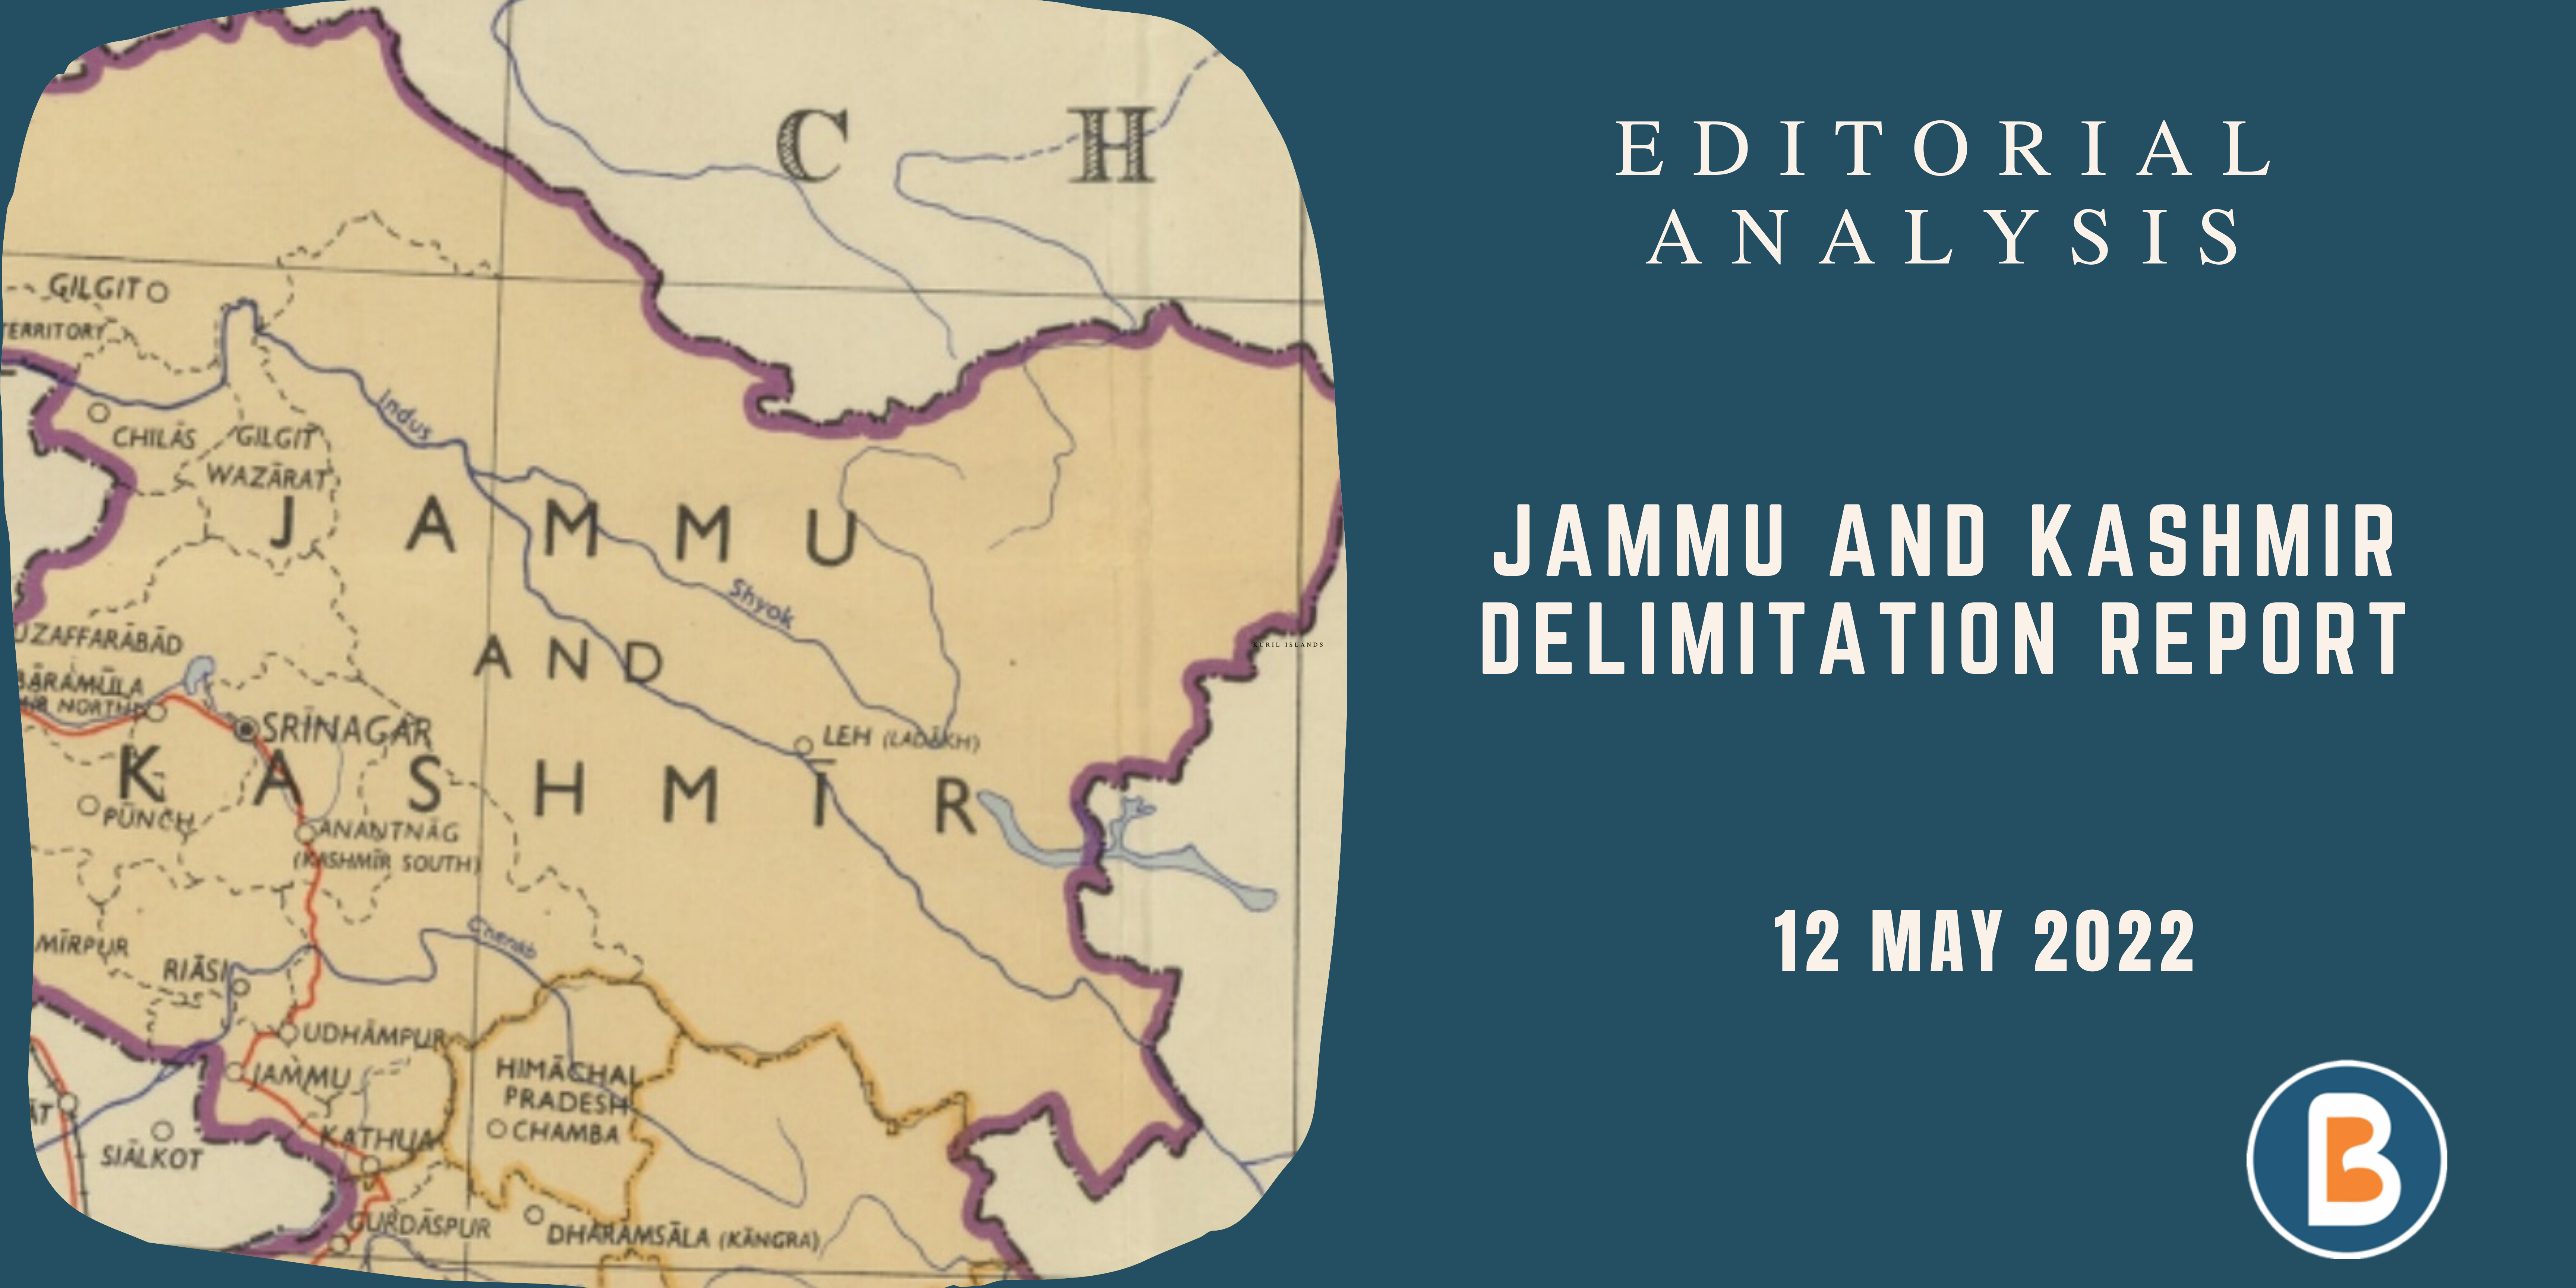 Editorial Analysis for Civil Services - Jammu and Kashmir Delimitation Report